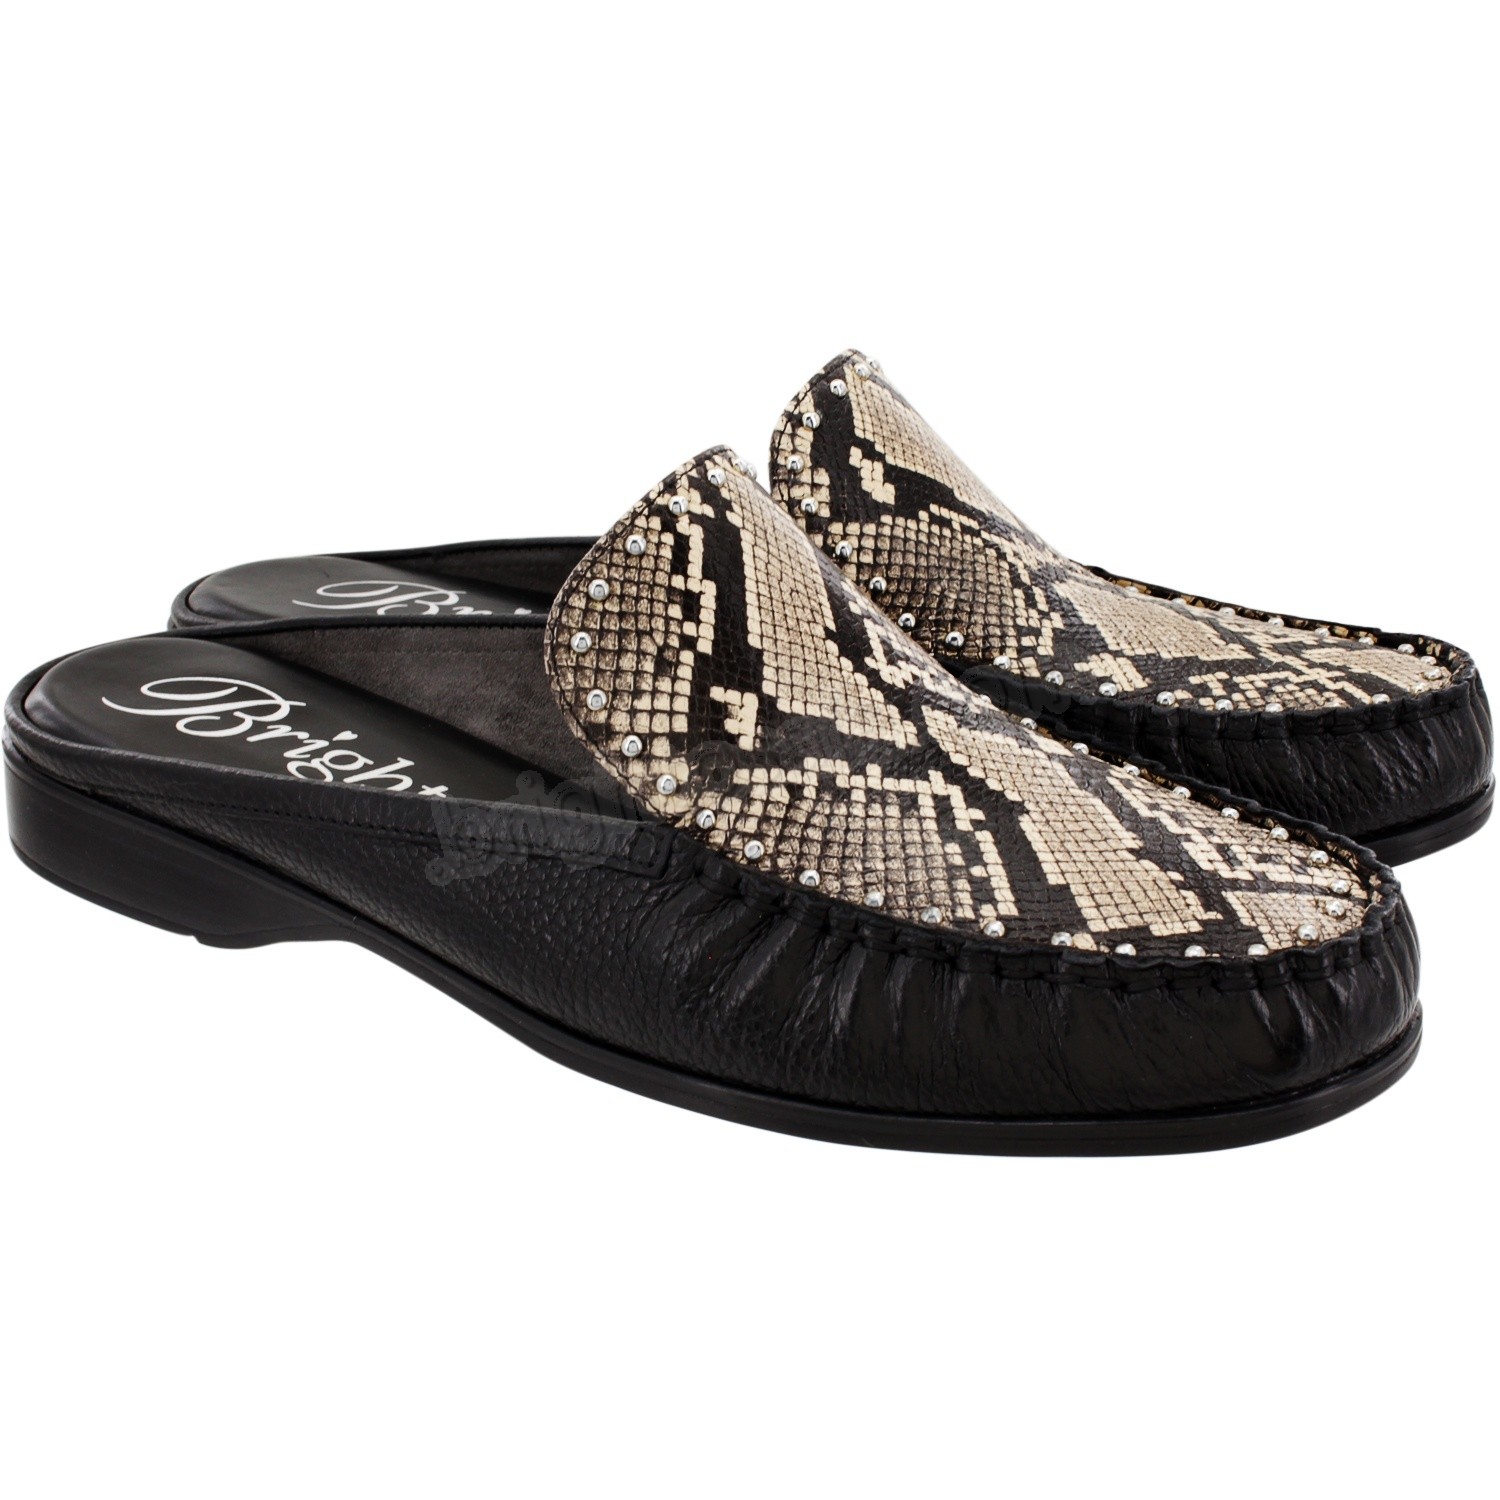 Brighton Collectibles & Online Discount Flame Sandals - Brighton Collectibles & Online Discount Flame Sandals